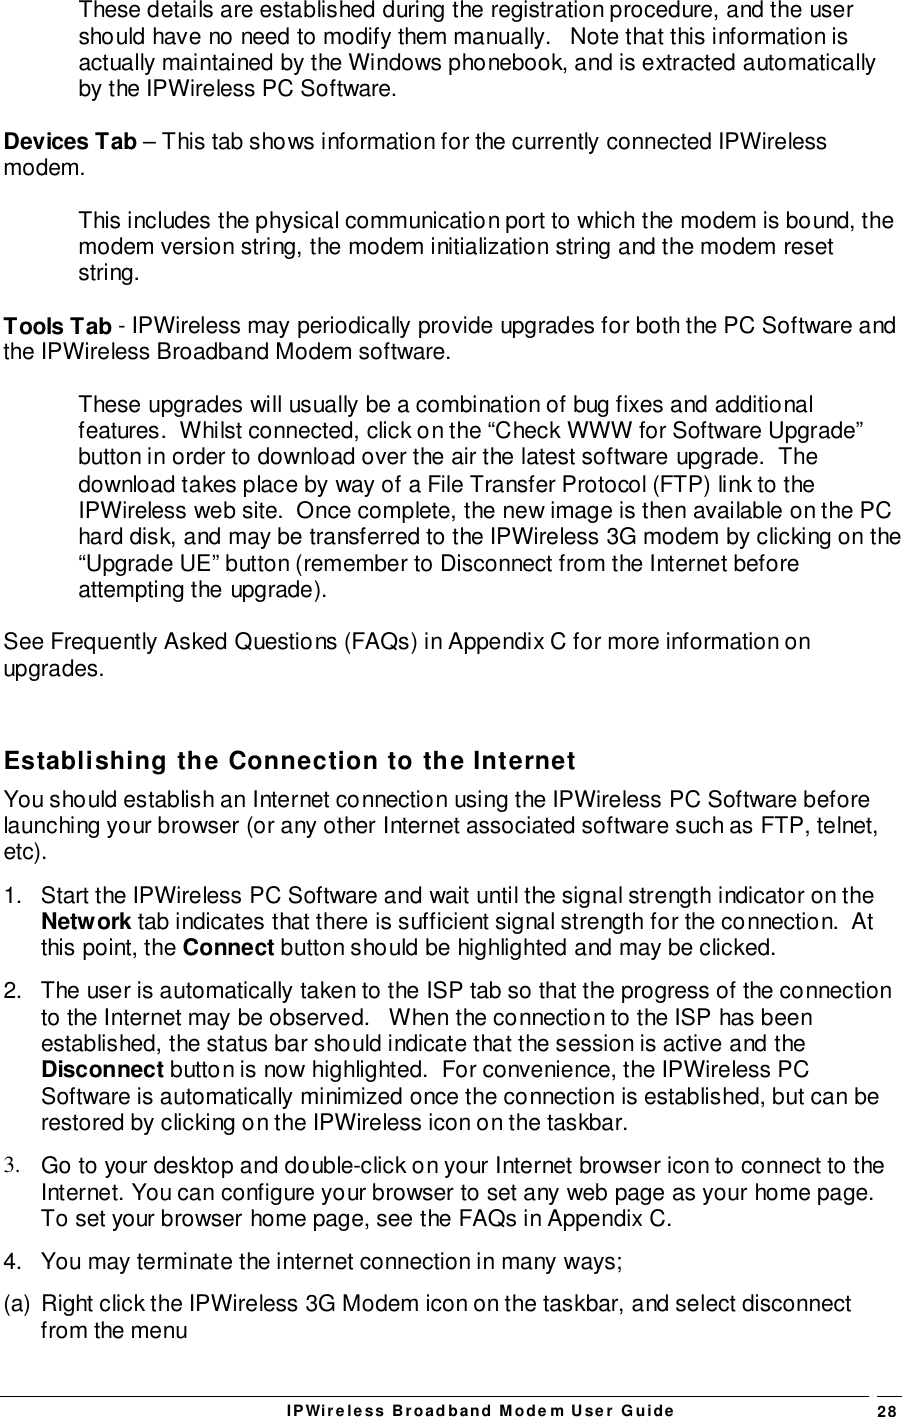 IPWireless Broadband Modem User Guide 28These details are established during the registration procedure, and the usershould have no need to modify them manually.   Note that this information isactually maintained by the Windows phonebook, and is extracted automaticallyby the IPWireless PC Software.Devices Tab – This tab shows information for the currently connected IPWirelessmodem.This includes the physical communication port to which the modem is bound, themodem version string, the modem initialization string and the modem resetstring.Tools Tab - IPWireless may periodically provide upgrades for both the PC Software andthe IPWireless Broadband Modem software.These upgrades will usually be a combination of bug fixes and additionalfeatures.  Whilst connected, click on the “Check WWW for Software Upgrade”button in order to download over the air the latest software upgrade.  Thedownload takes place by way of a File Transfer Protocol (FTP) link to theIPWireless web site.  Once complete, the new image is then available on the PChard disk, and may be transferred to the IPWireless 3G modem by clicking on the“Upgrade UE” button (remember to Disconnect from the Internet beforeattempting the upgrade).See Frequently Asked Questions (FAQs) in Appendix C for more information onupgrades.Establishing the Connection to the InternetYou should establish an Internet connection using the IPWireless PC Software beforelaunching your browser (or any other Internet associated software such as FTP, telnet,etc).1.  Start the IPWireless PC Software and wait until the signal strength indicator on theNetwork tab indicates that there is sufficient signal strength for the connection.  Atthis point, the Connect button should be highlighted and may be clicked.2.  The user is automatically taken to the ISP tab so that the progress of the connectionto the Internet may be observed.   When the connection to the ISP has beenestablished, the status bar should indicate that the session is active and theDisconnect button is now highlighted.  For convenience, the IPWireless PCSoftware is automatically minimized once the connection is established, but can berestored by clicking on the IPWireless icon on the taskbar.3.  Go to your desktop and double-click on your Internet browser icon to connect to theInternet. You can configure your browser to set any web page as your home page.To set your browser home page, see the FAQs in Appendix C.4.  You may terminate the internet connection in many ways;(a)  Right click the IPWireless 3G Modem icon on the taskbar, and select disconnectfrom the menu